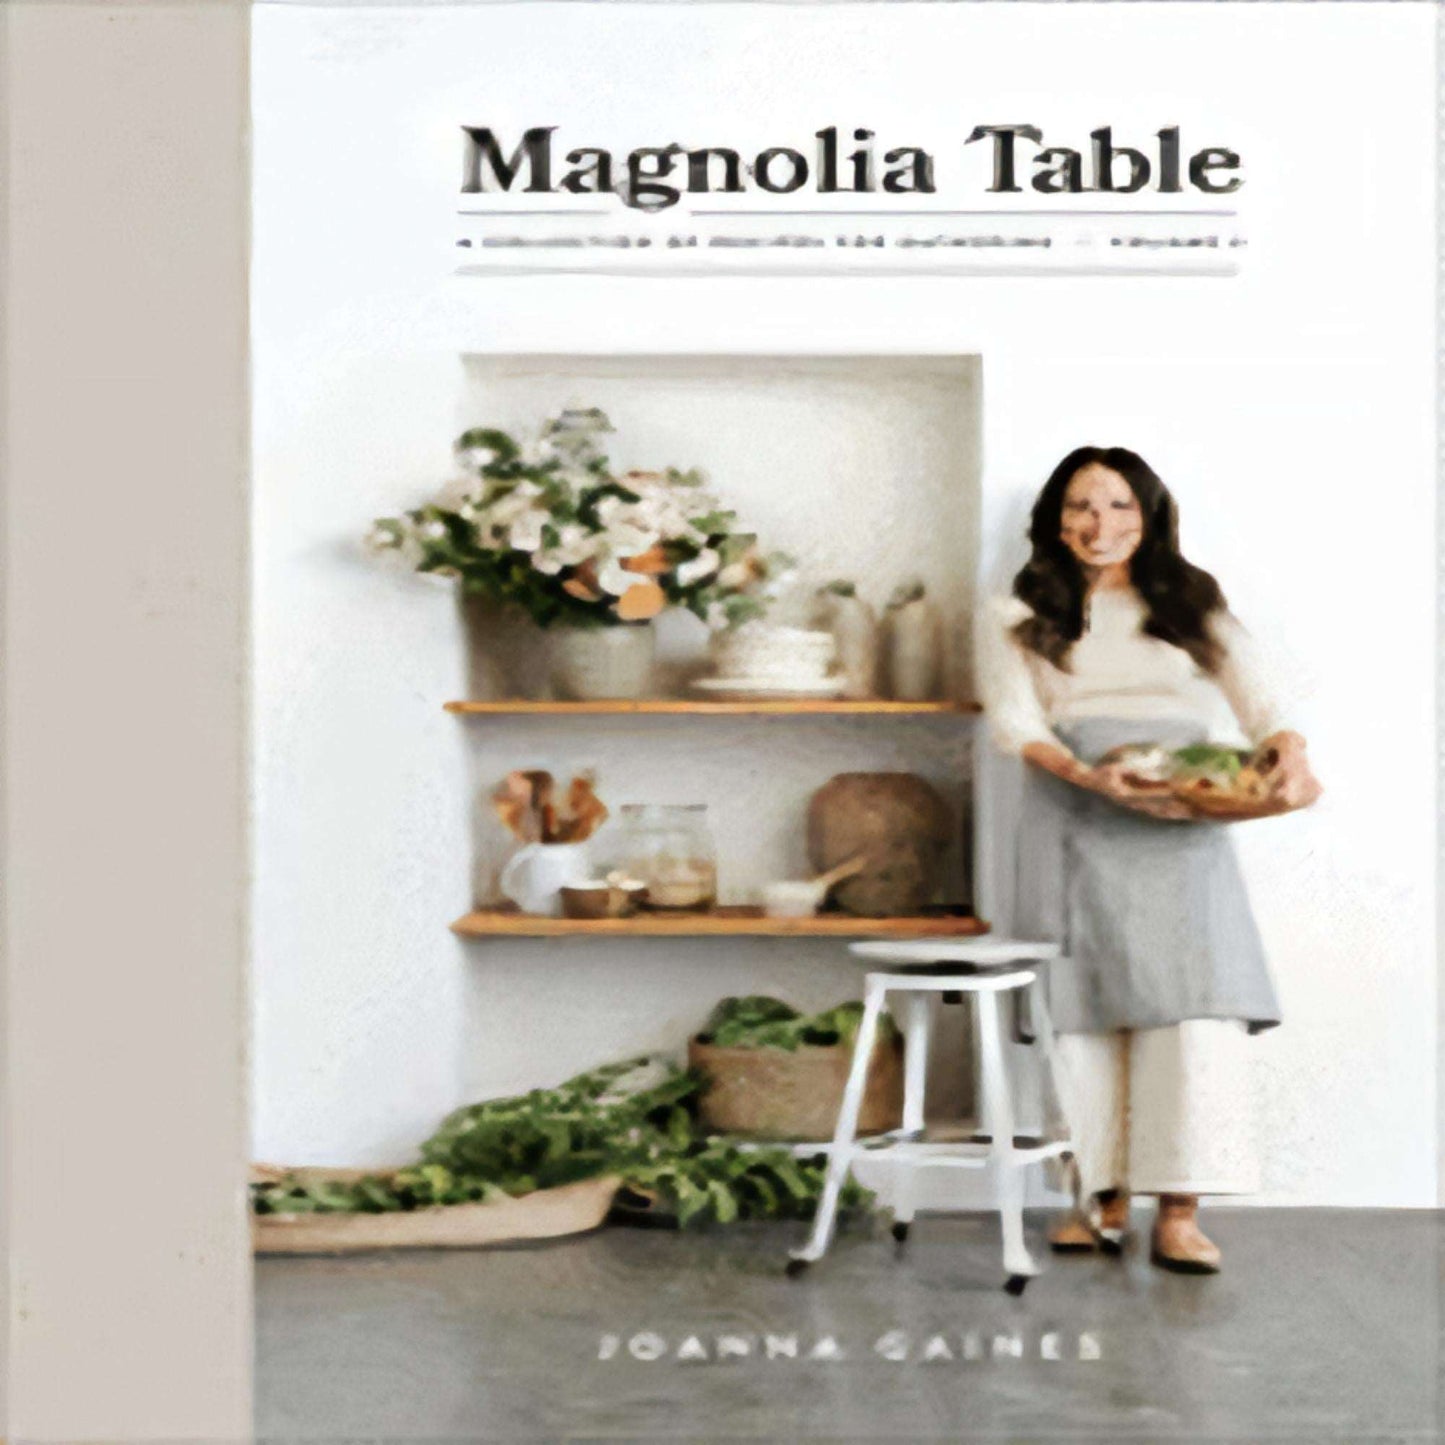 TEXTBOOK Magnolia Table, Volume 2: A Collection of Recipes for Gathering127-022223-0062820184DPGBOOKSTORE.COM. Today's Bestsellers.